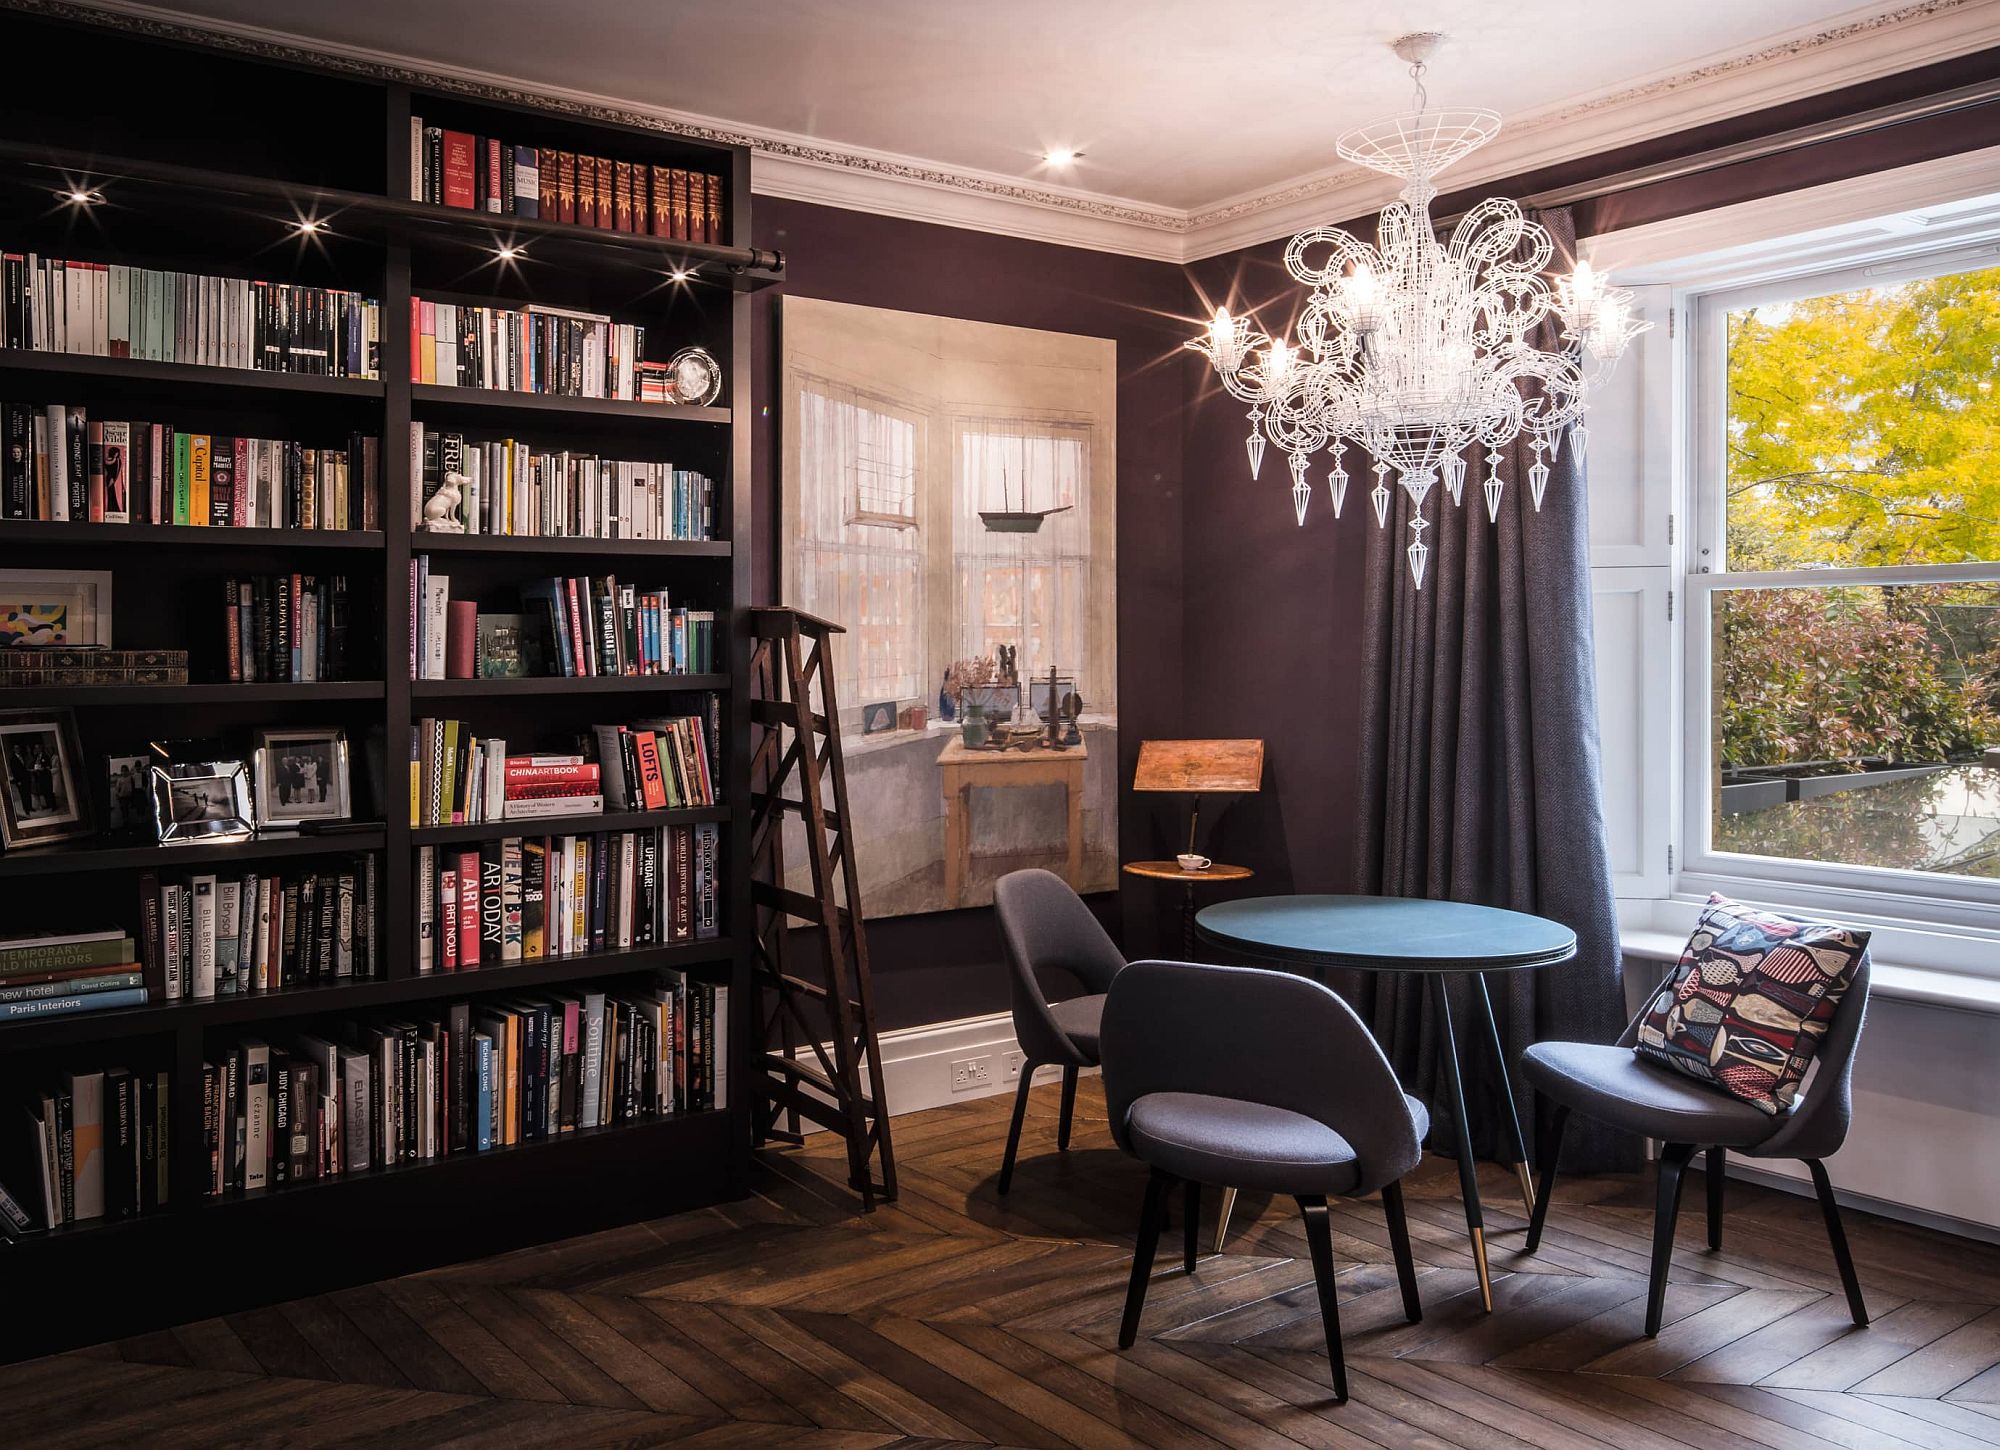 Black walls and a spacious bookshelf give the room a classic eclectic vibe